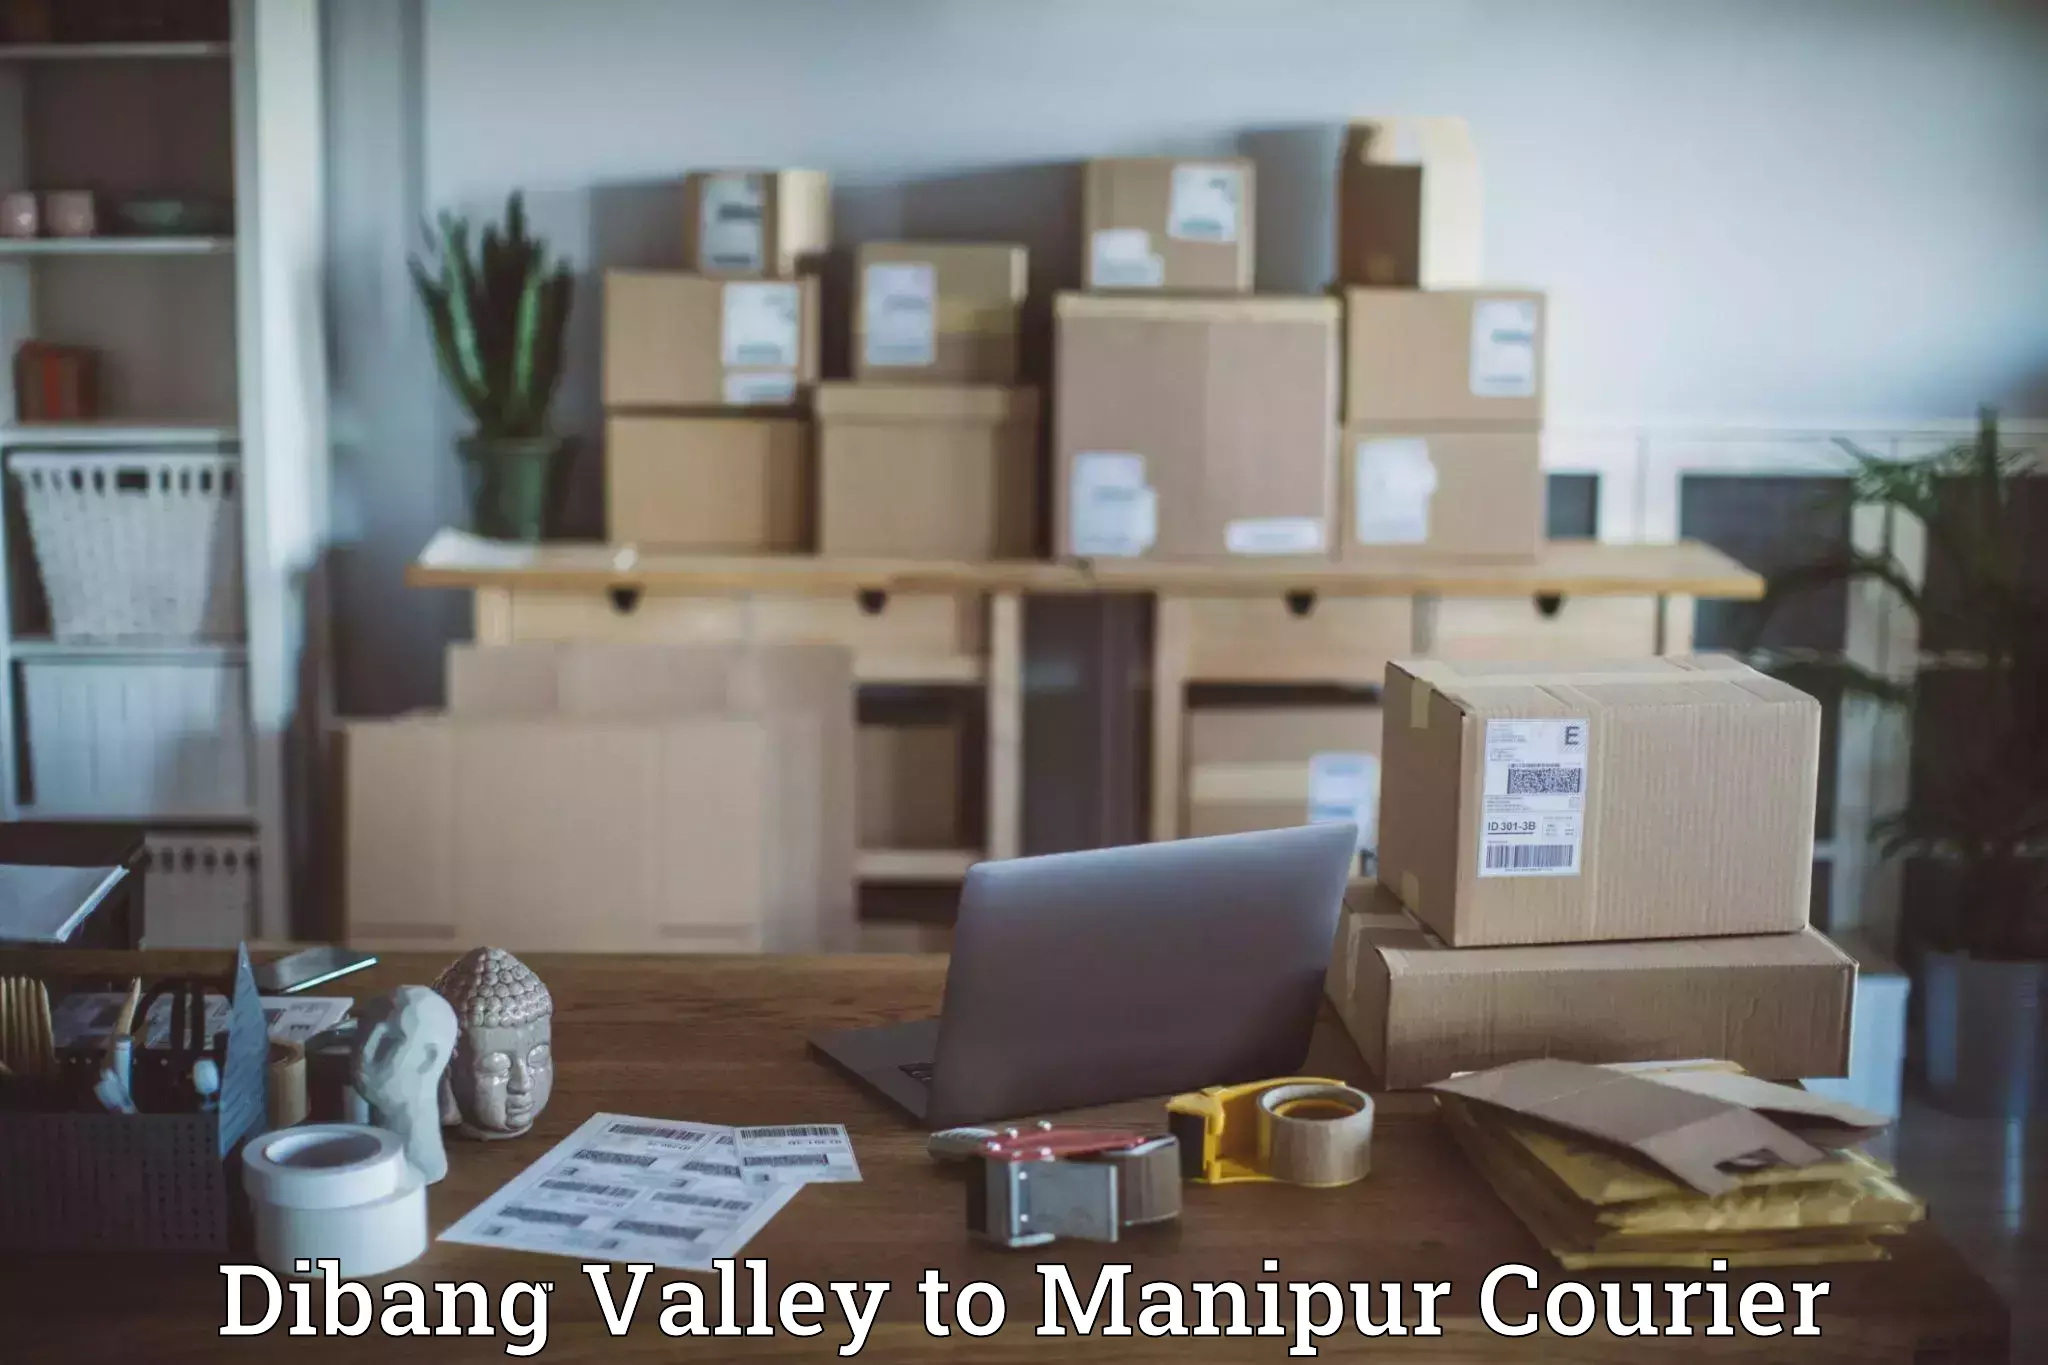 Courier app Dibang Valley to Manipur